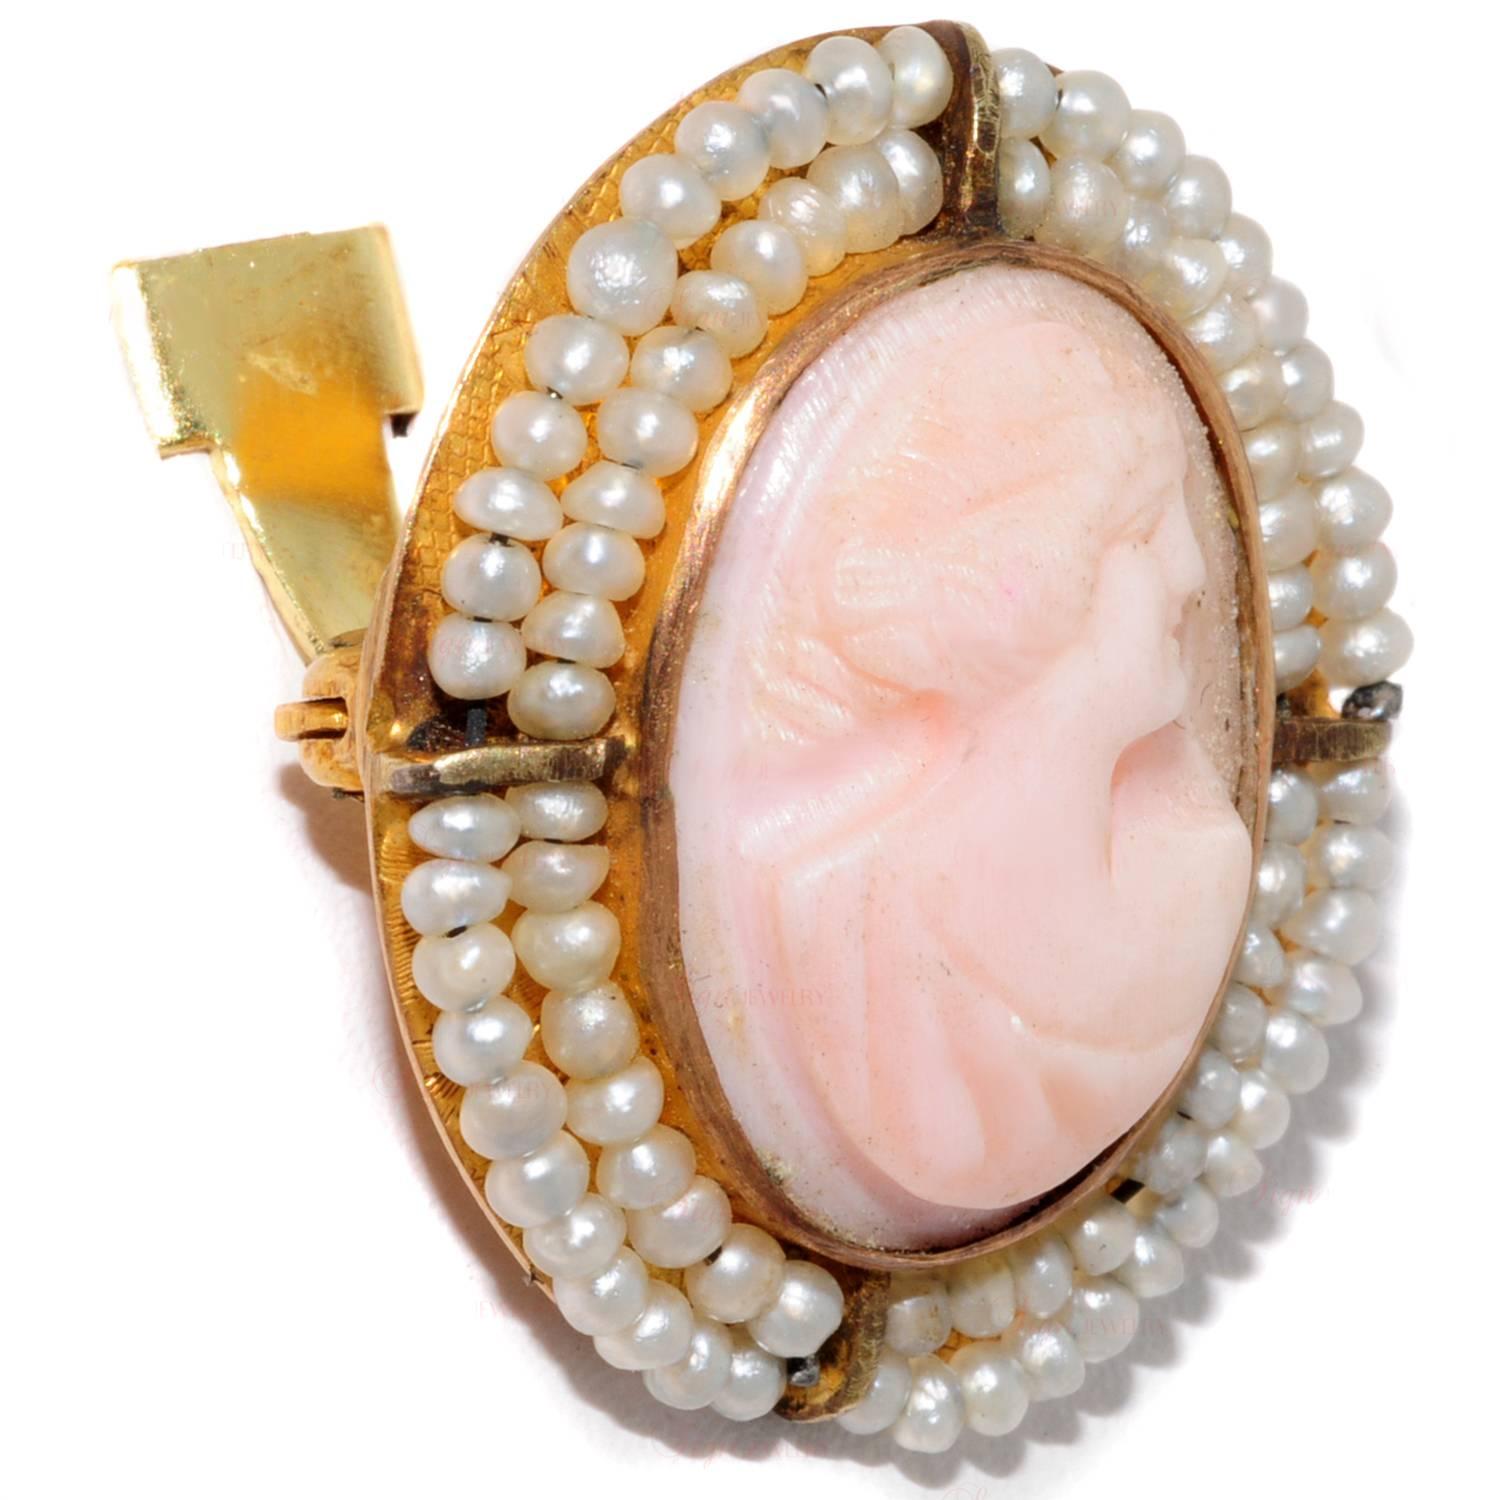 This ornate cameo lady portrait brooch was made in circa 1900-1910. It is crafted out of 14k yellow gold and features a carved angel skin cameo portrait of a lady encircled by two rows of saltwater pearls. Measurements: 0.70